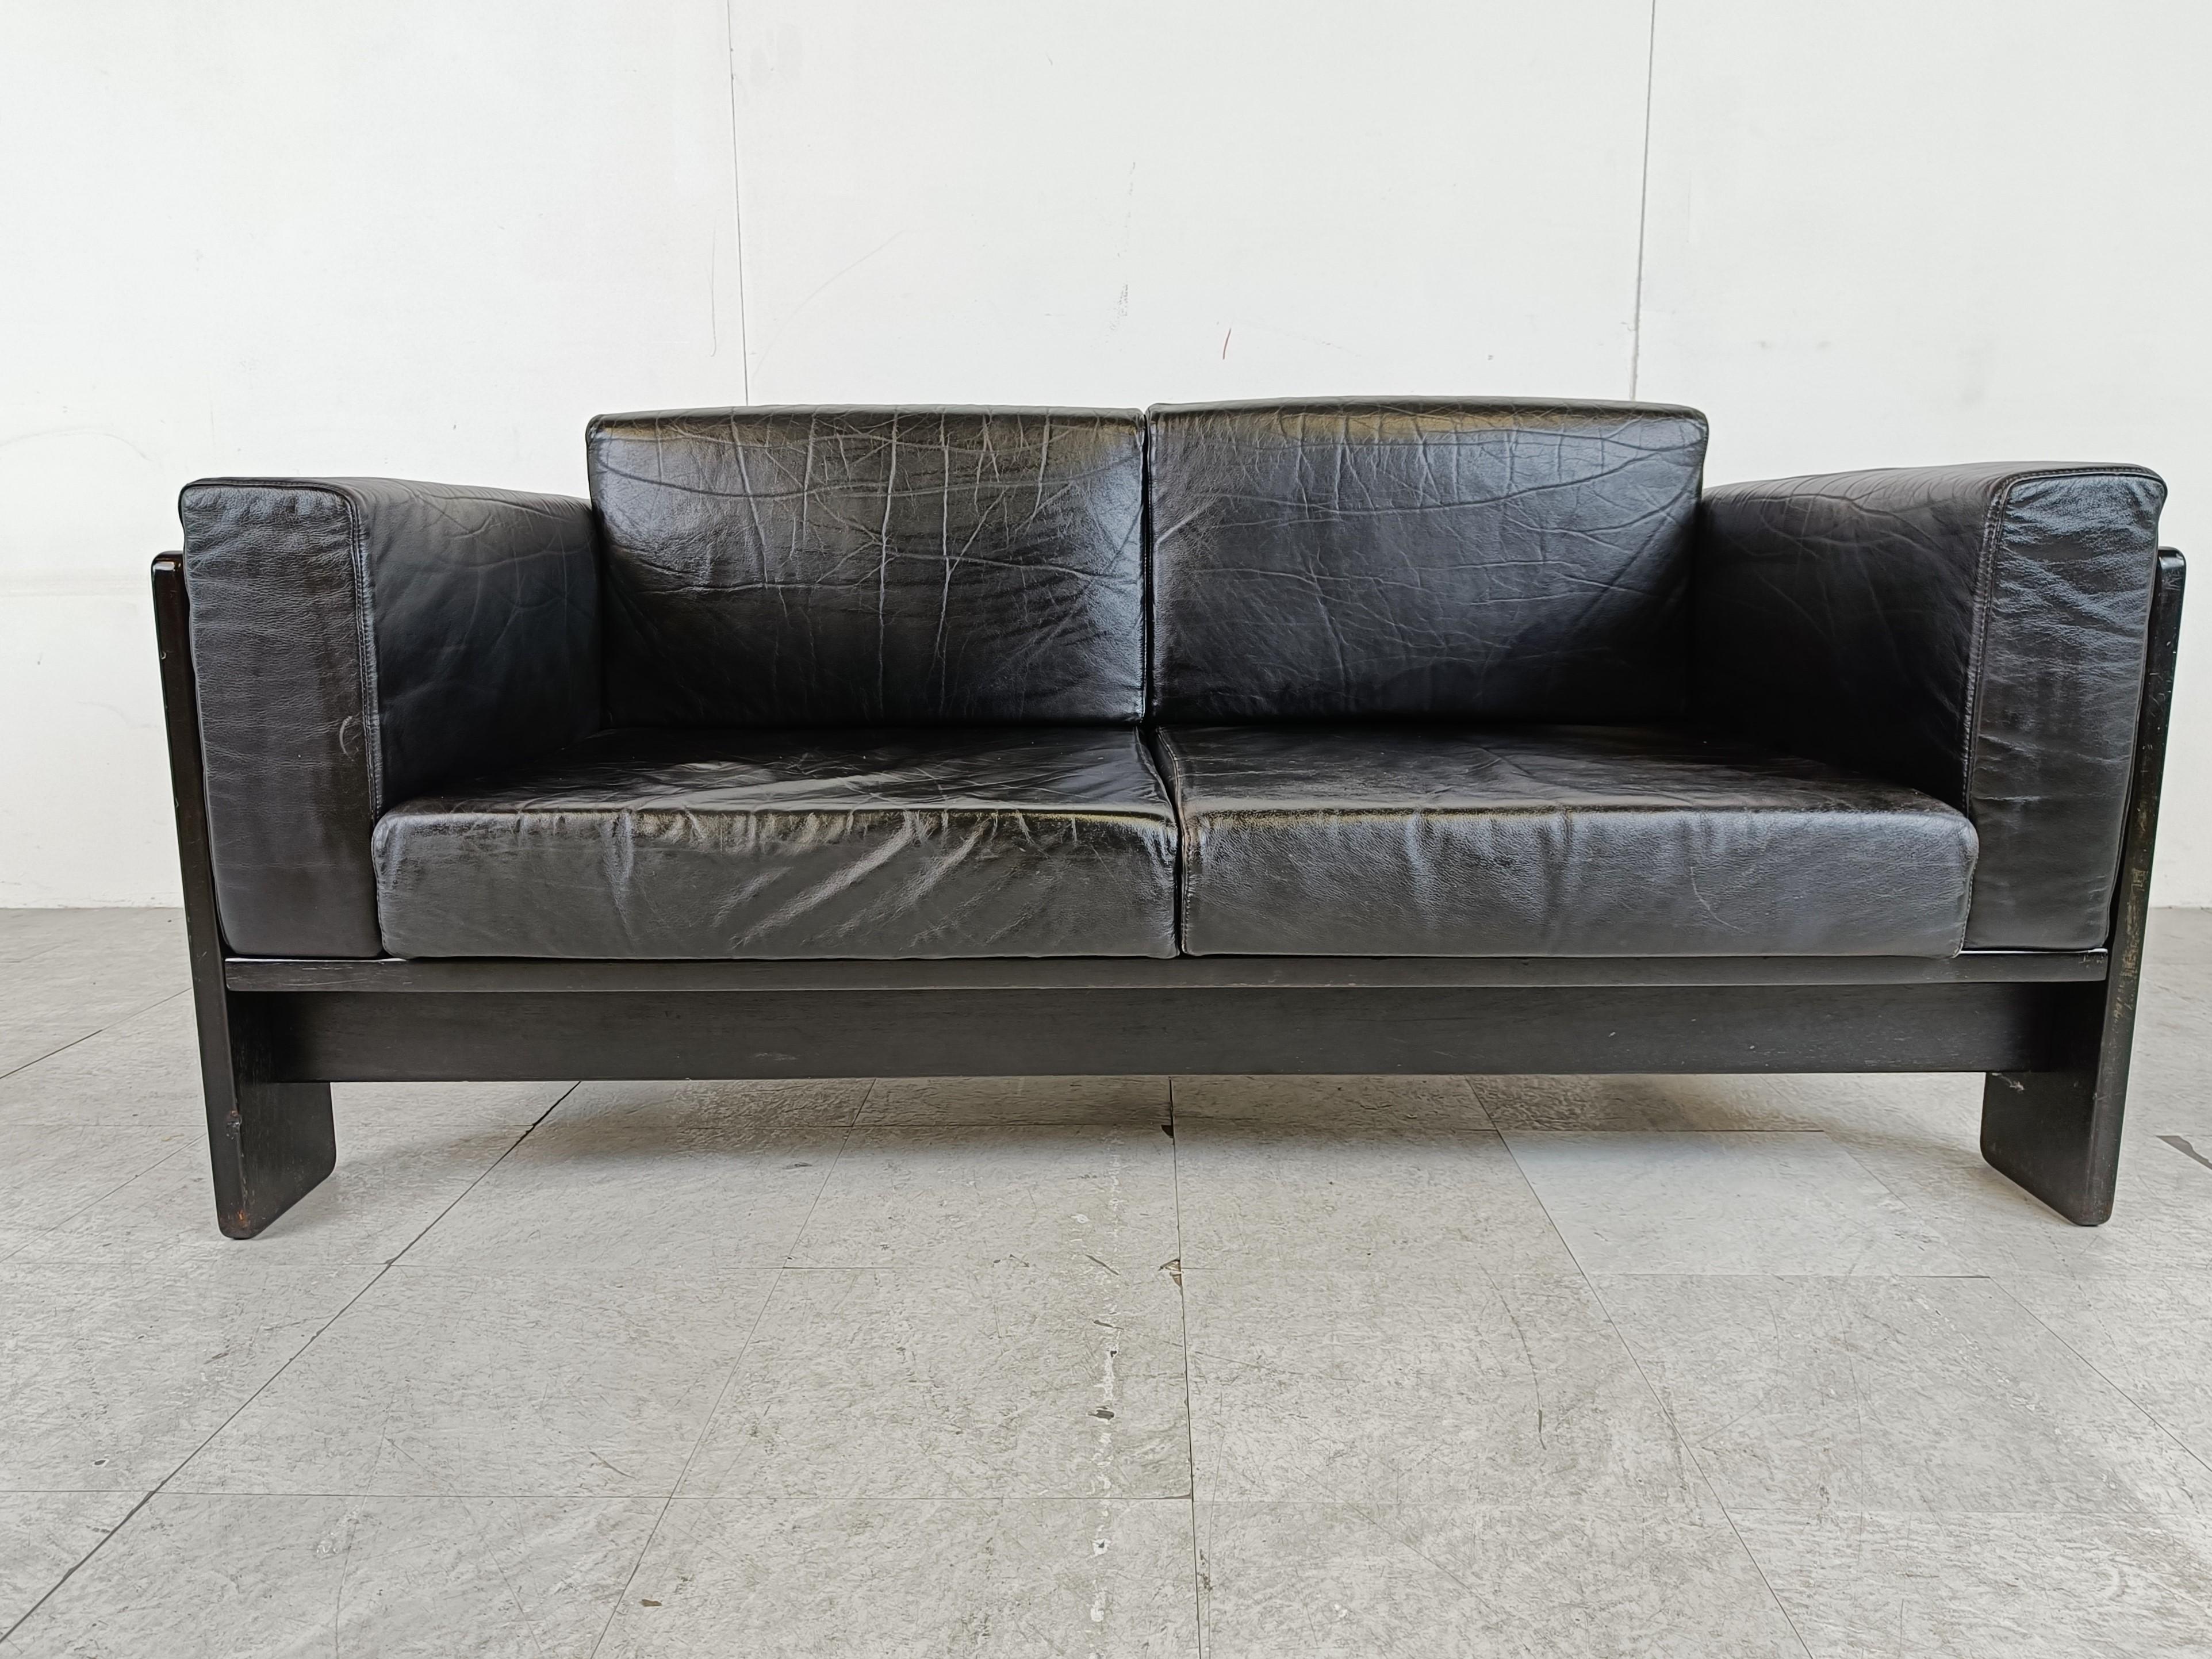 Ebonized Tobia Scarpa 'Bastiano' two seater sofa by Knoll, 1970s For Sale